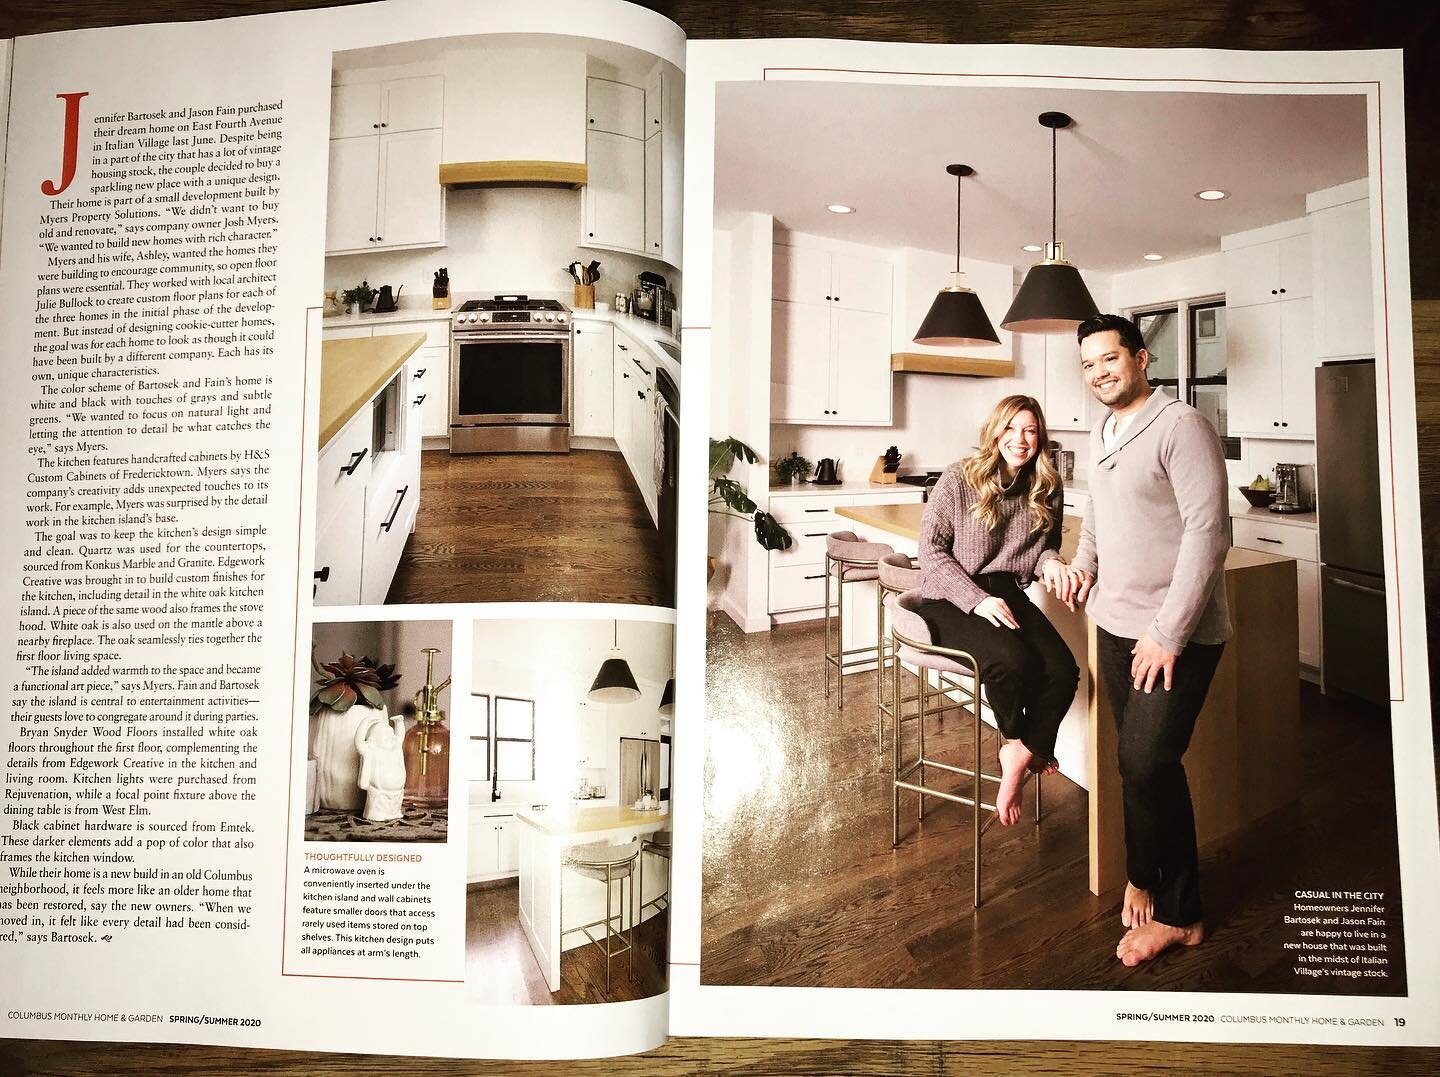 Columbus Monthly&rsquo;s latest Home &amp; Garden issue features the kitchen from one of the three homes in Italian Village we designed and built last year. It highlights the work of some of our trade partners, specifically the work of @edgeworkcreat